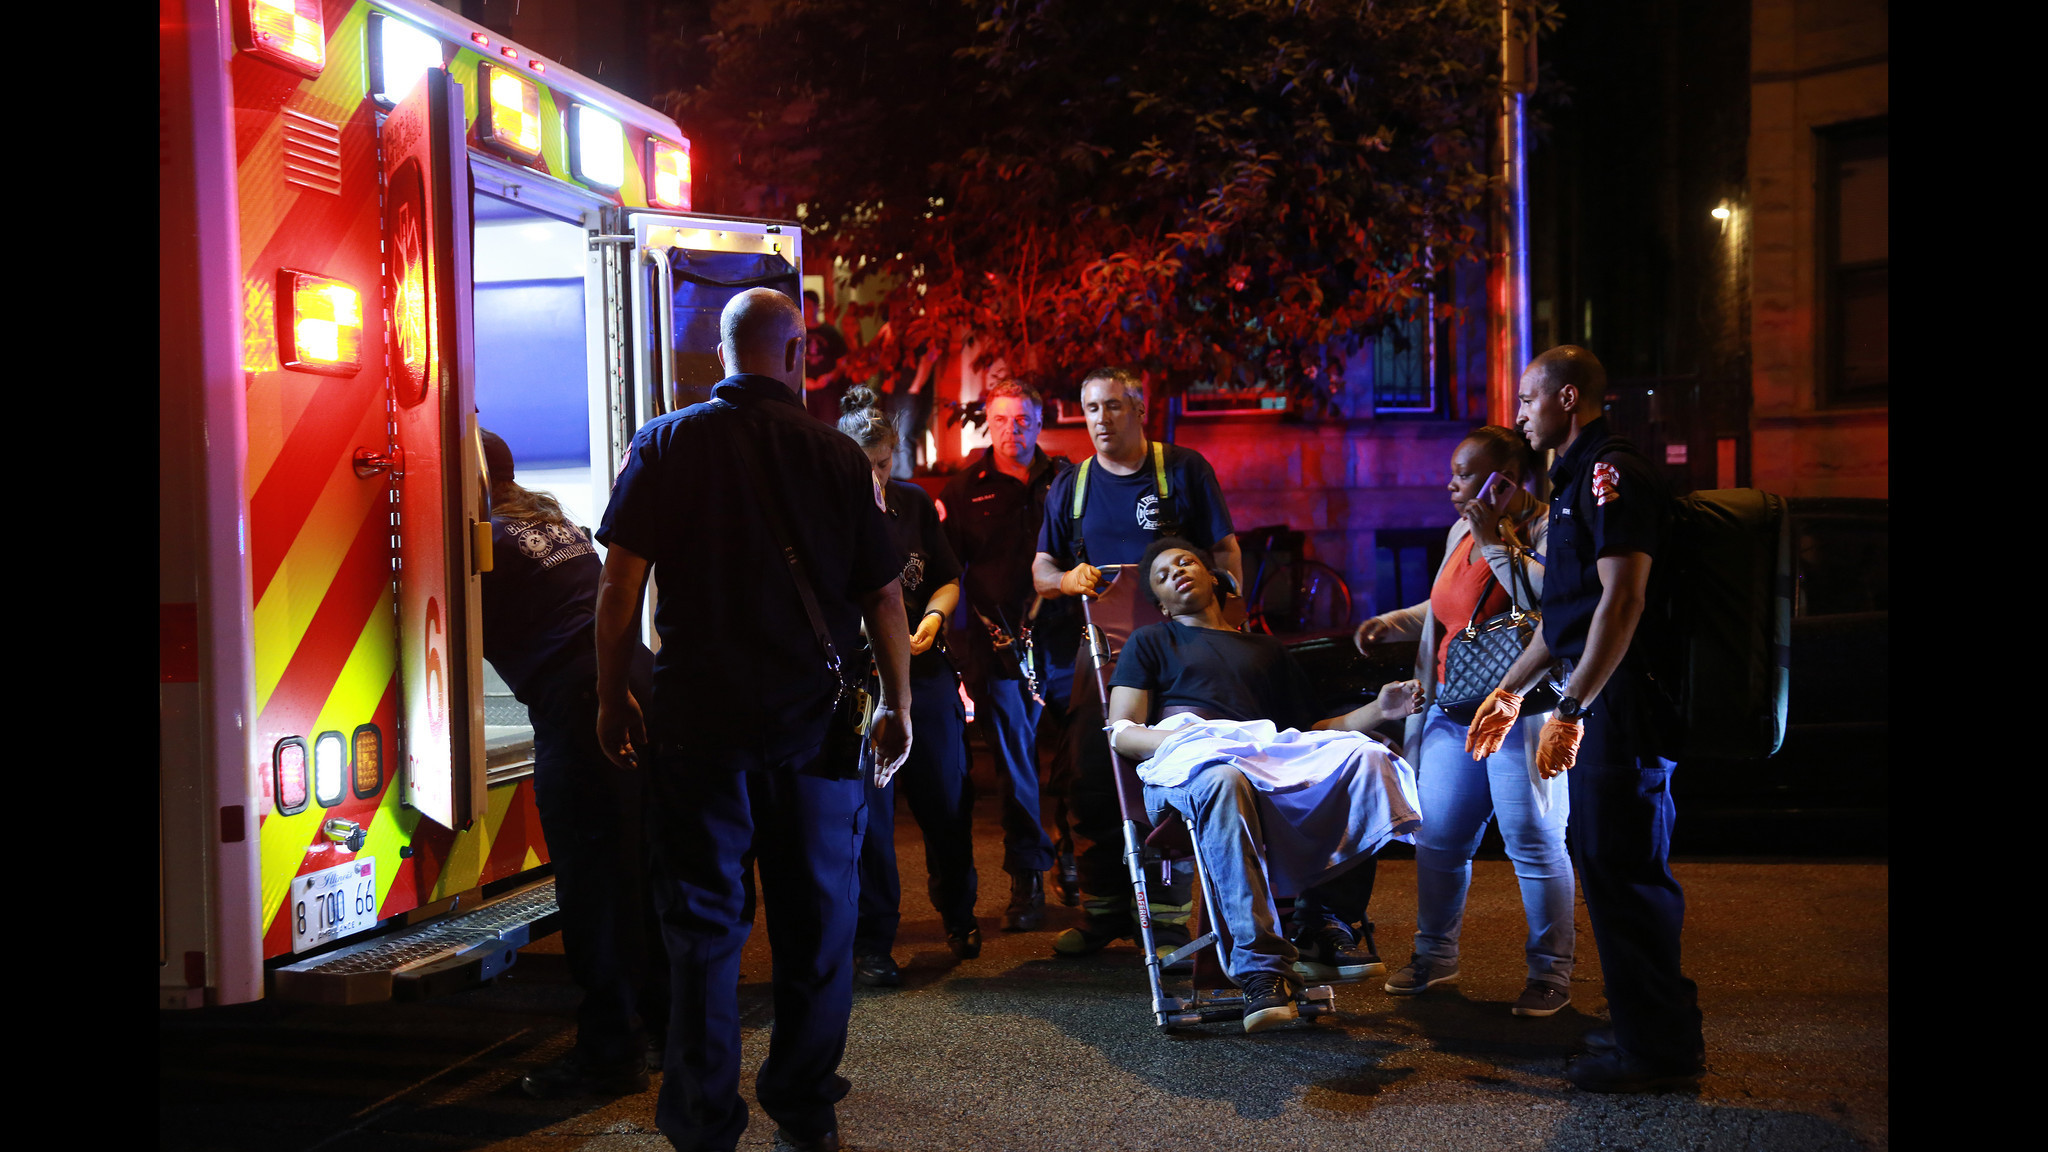 Chicago violence toll: 63 people shot while 10 killed